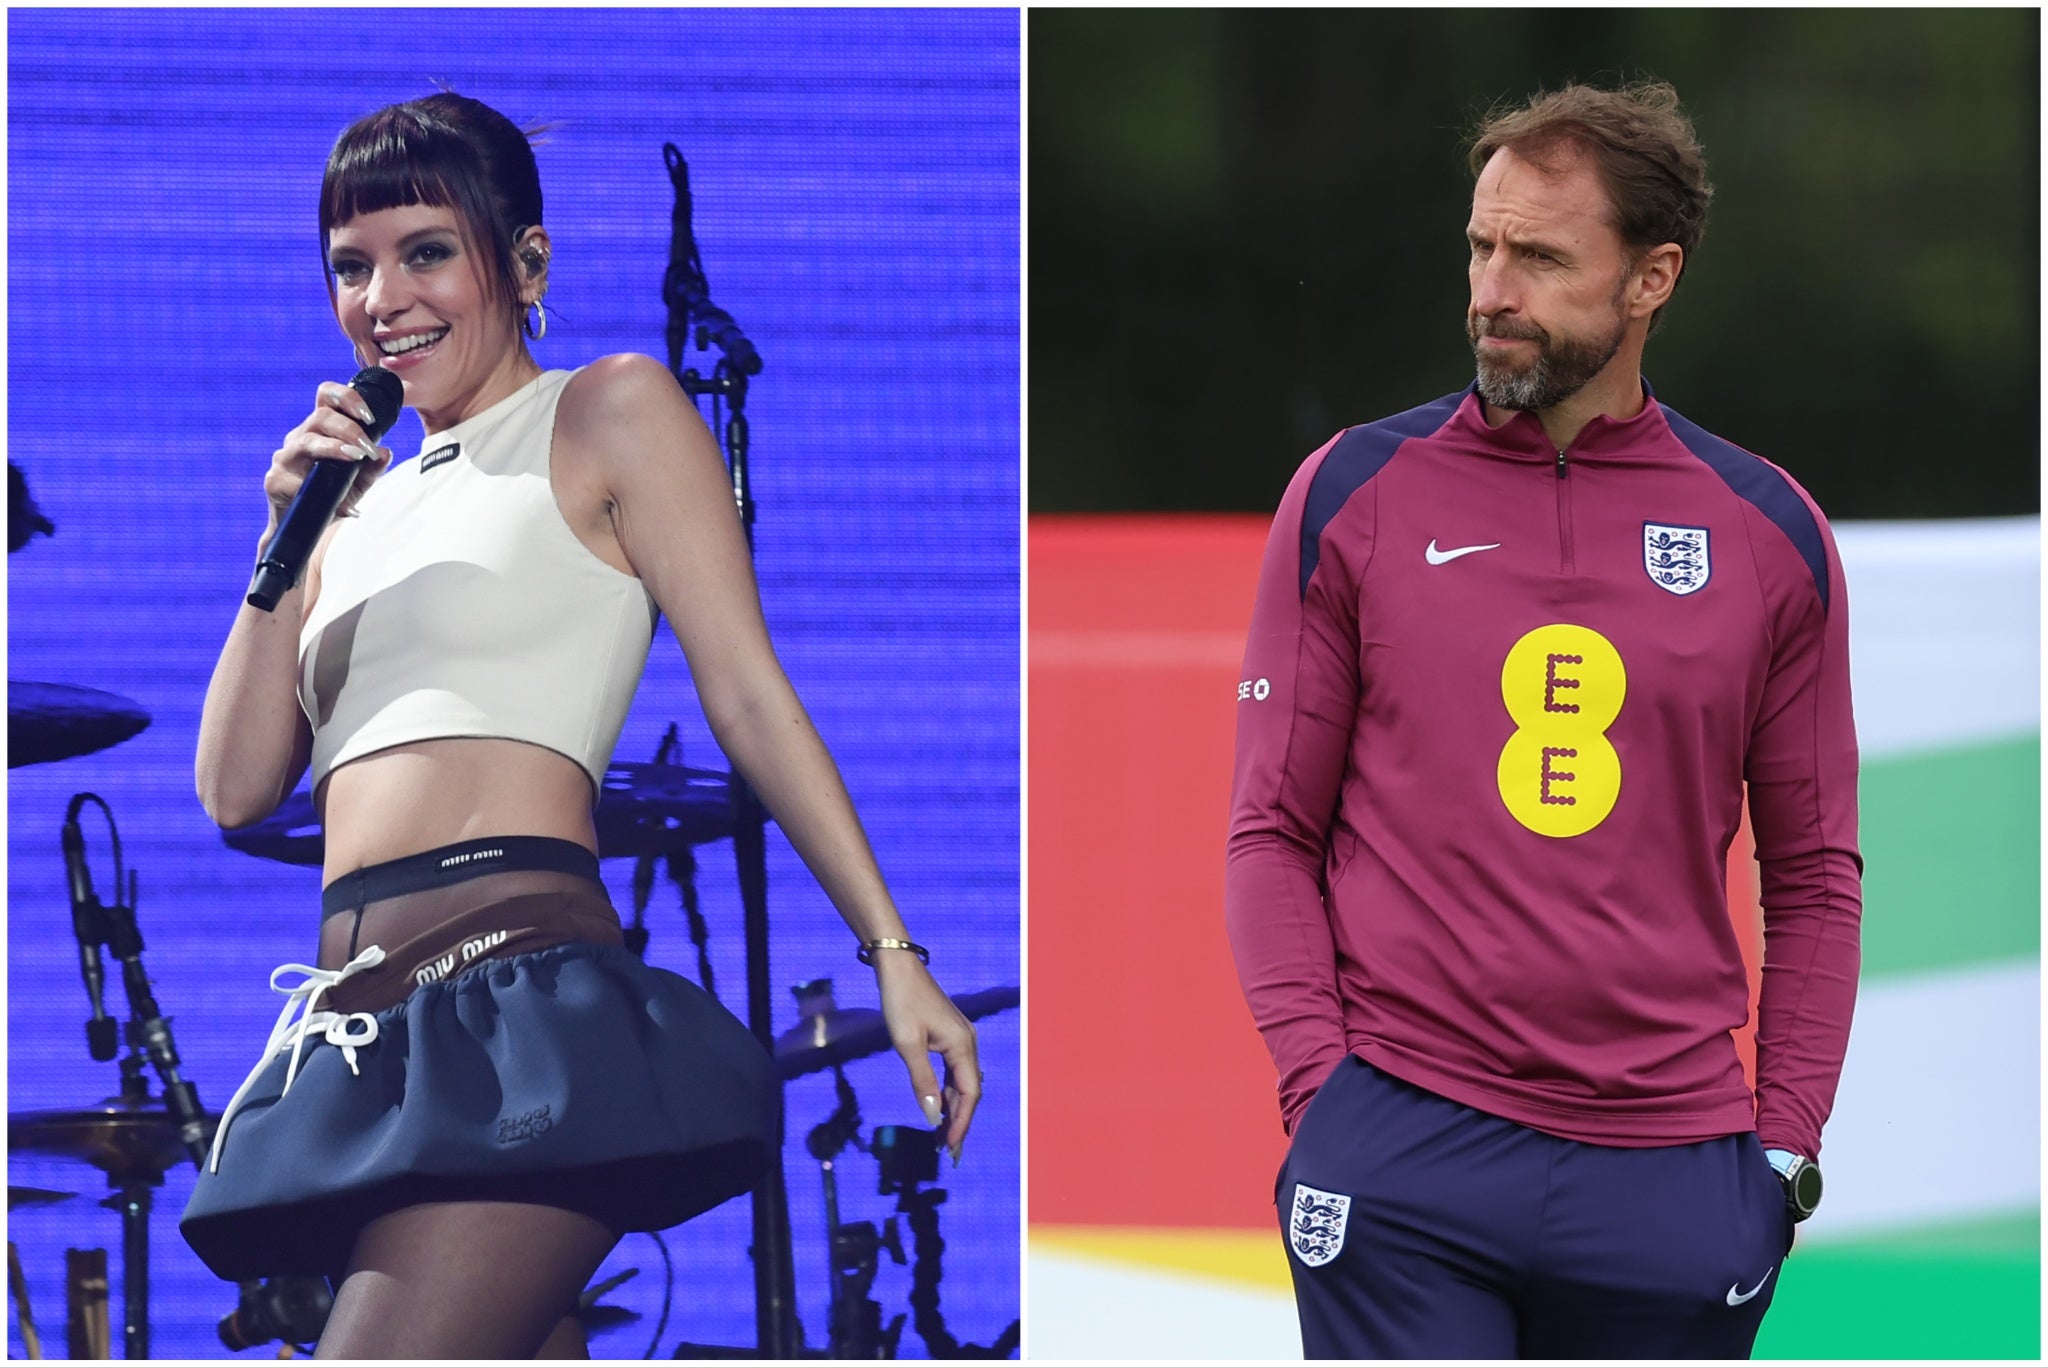 Lily Allen had a cheeky dig at Gareth Southgate ahead of England’s quarter-finals match